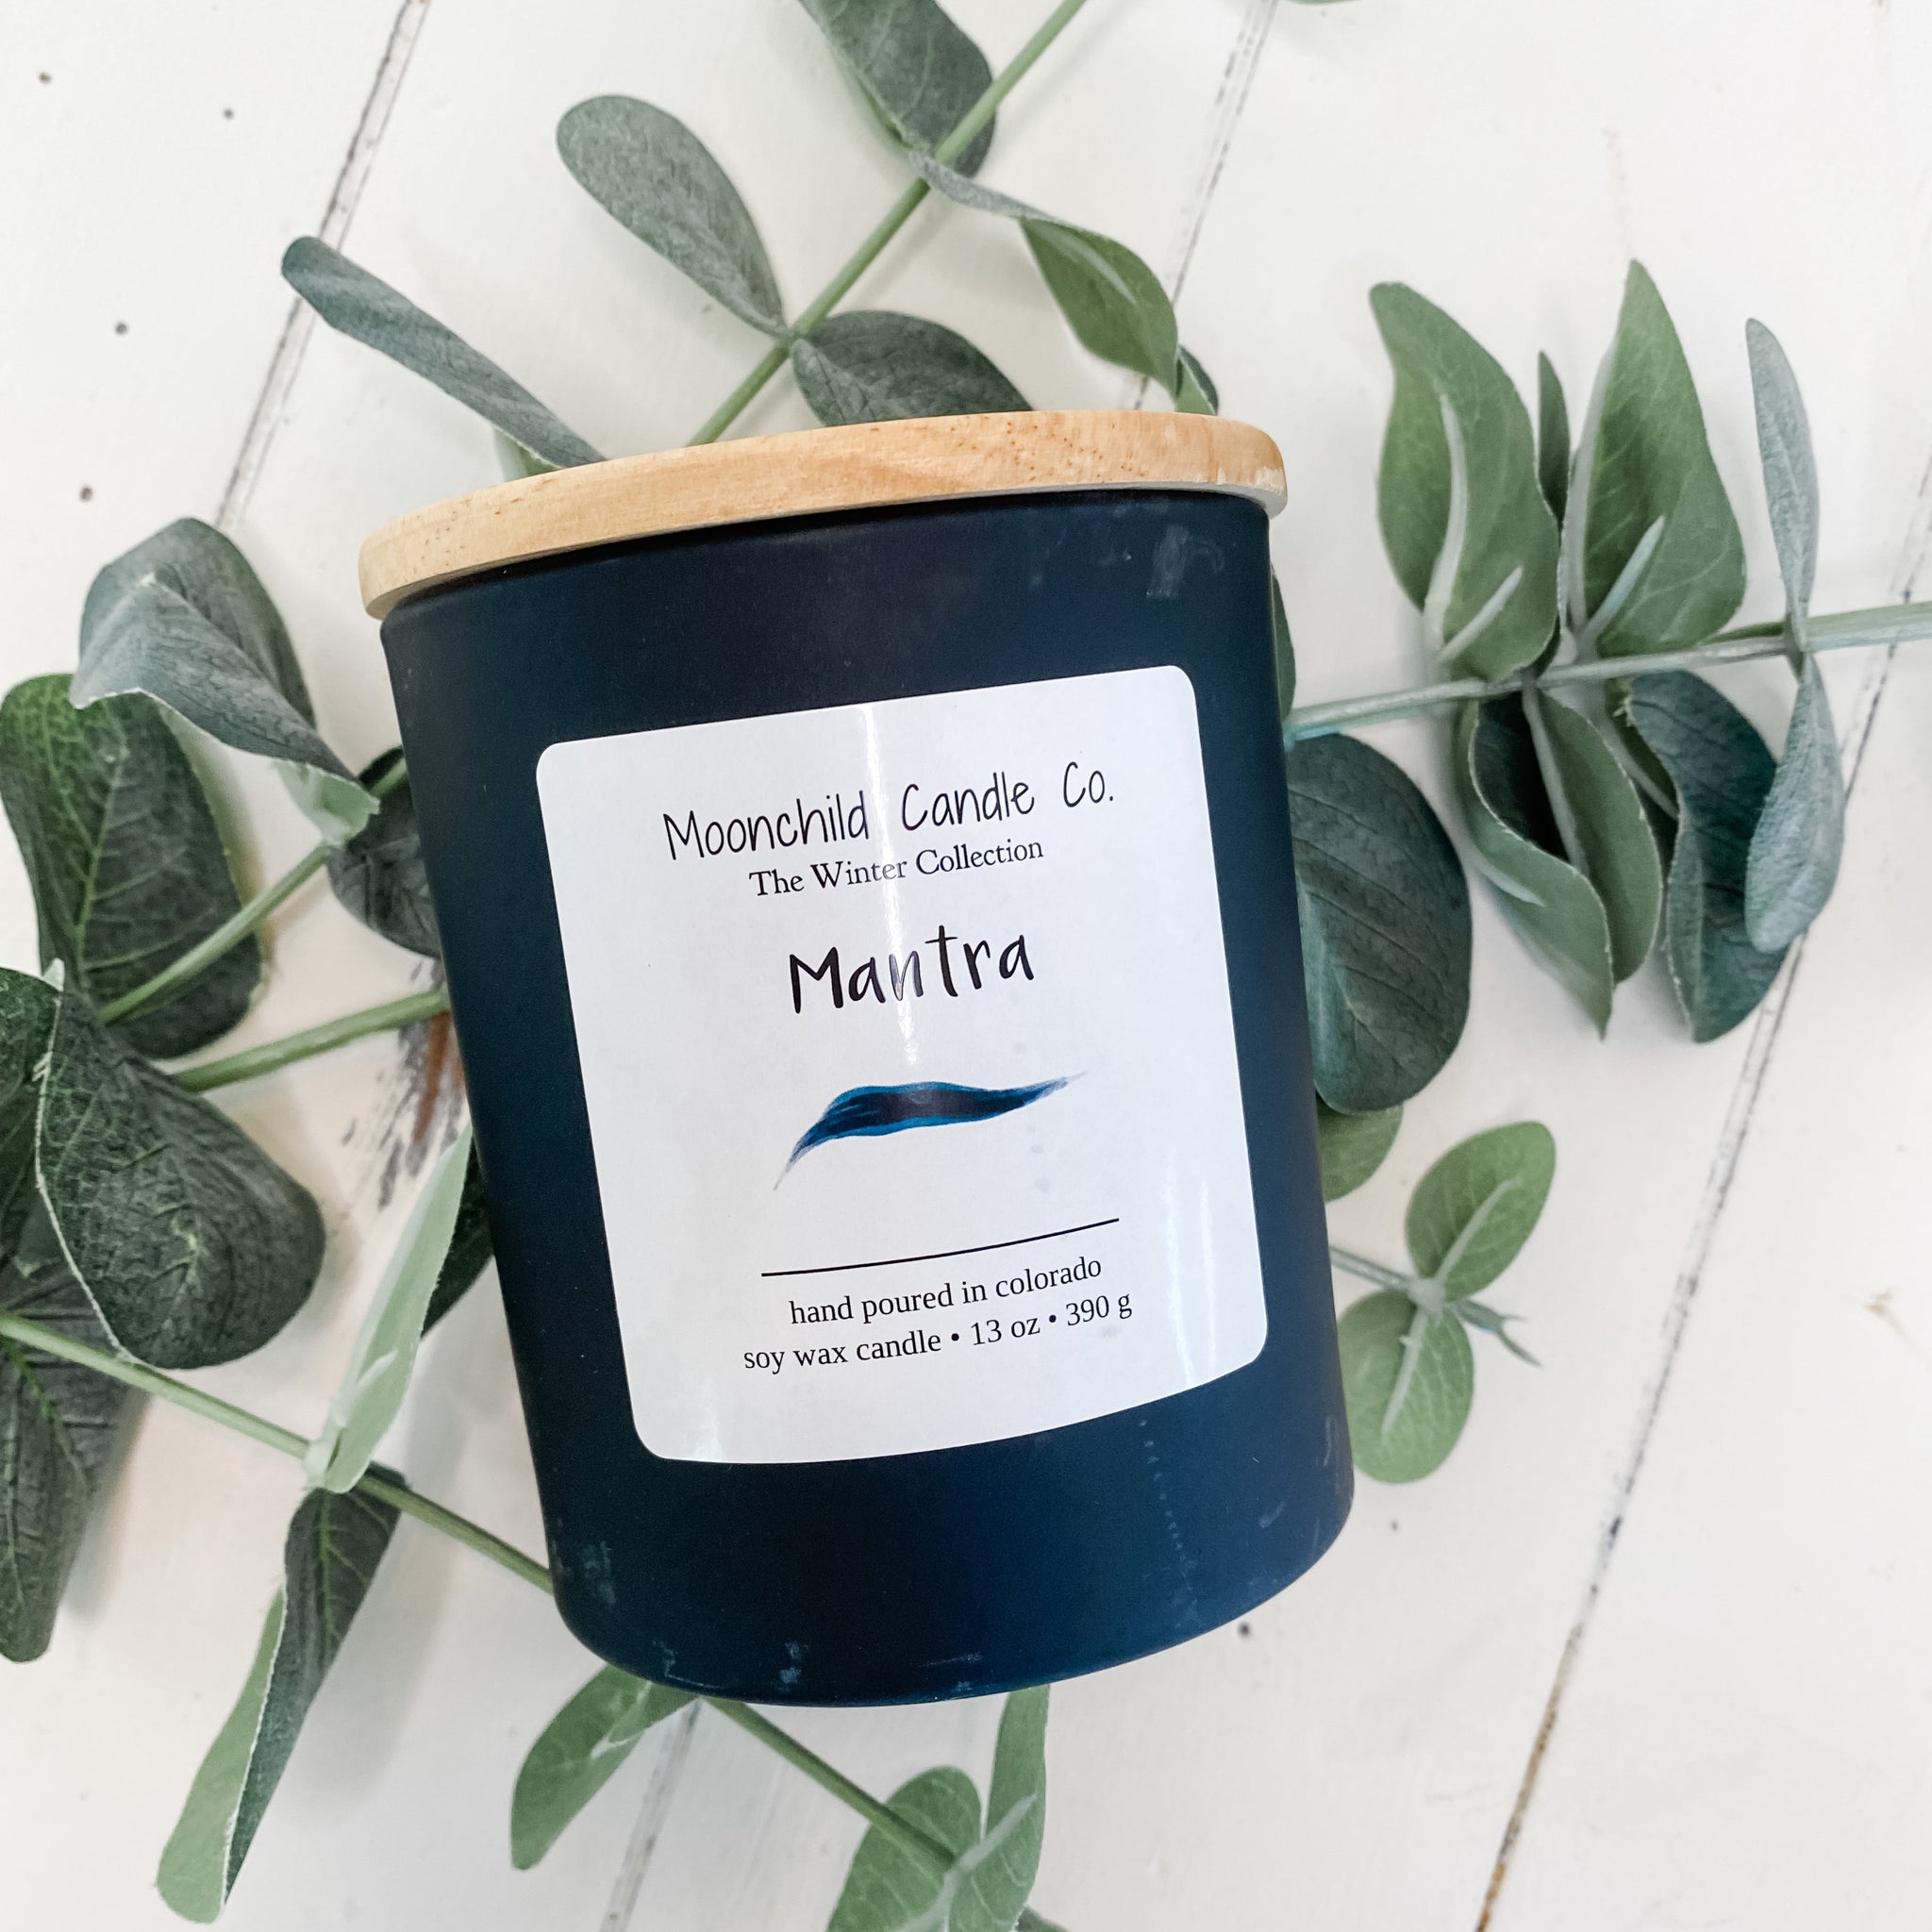 Mantra, Soy Wax Candle - Moonchild Candle Co.